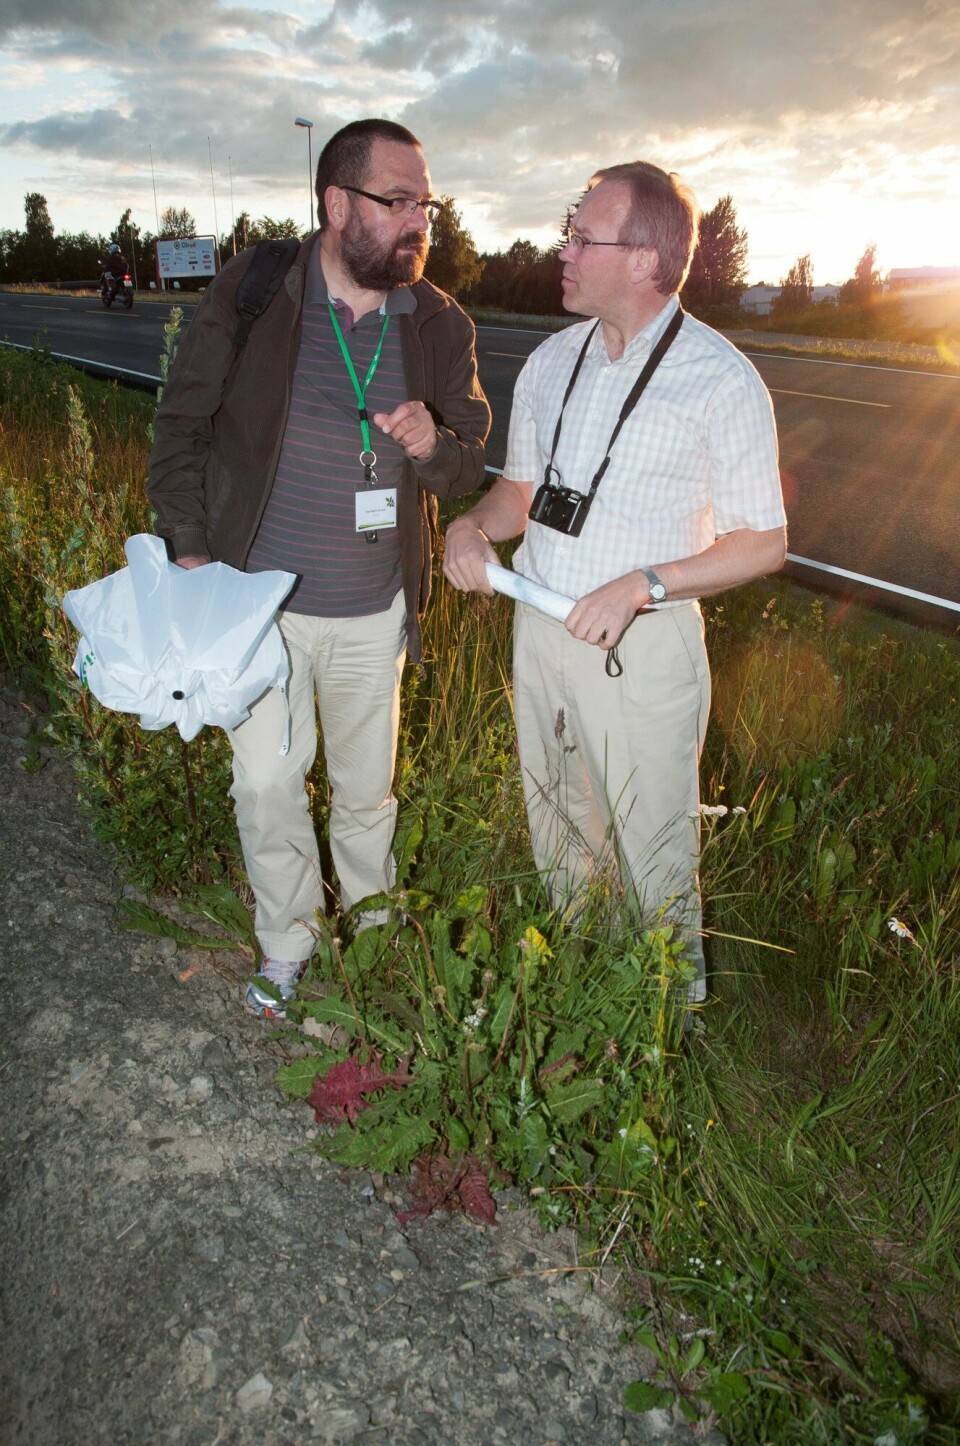 Dag-Ragnar Blystad discussing virology with his colleague Jari Valkonen from university of Helsinki during a meeting in Norway in 2010.